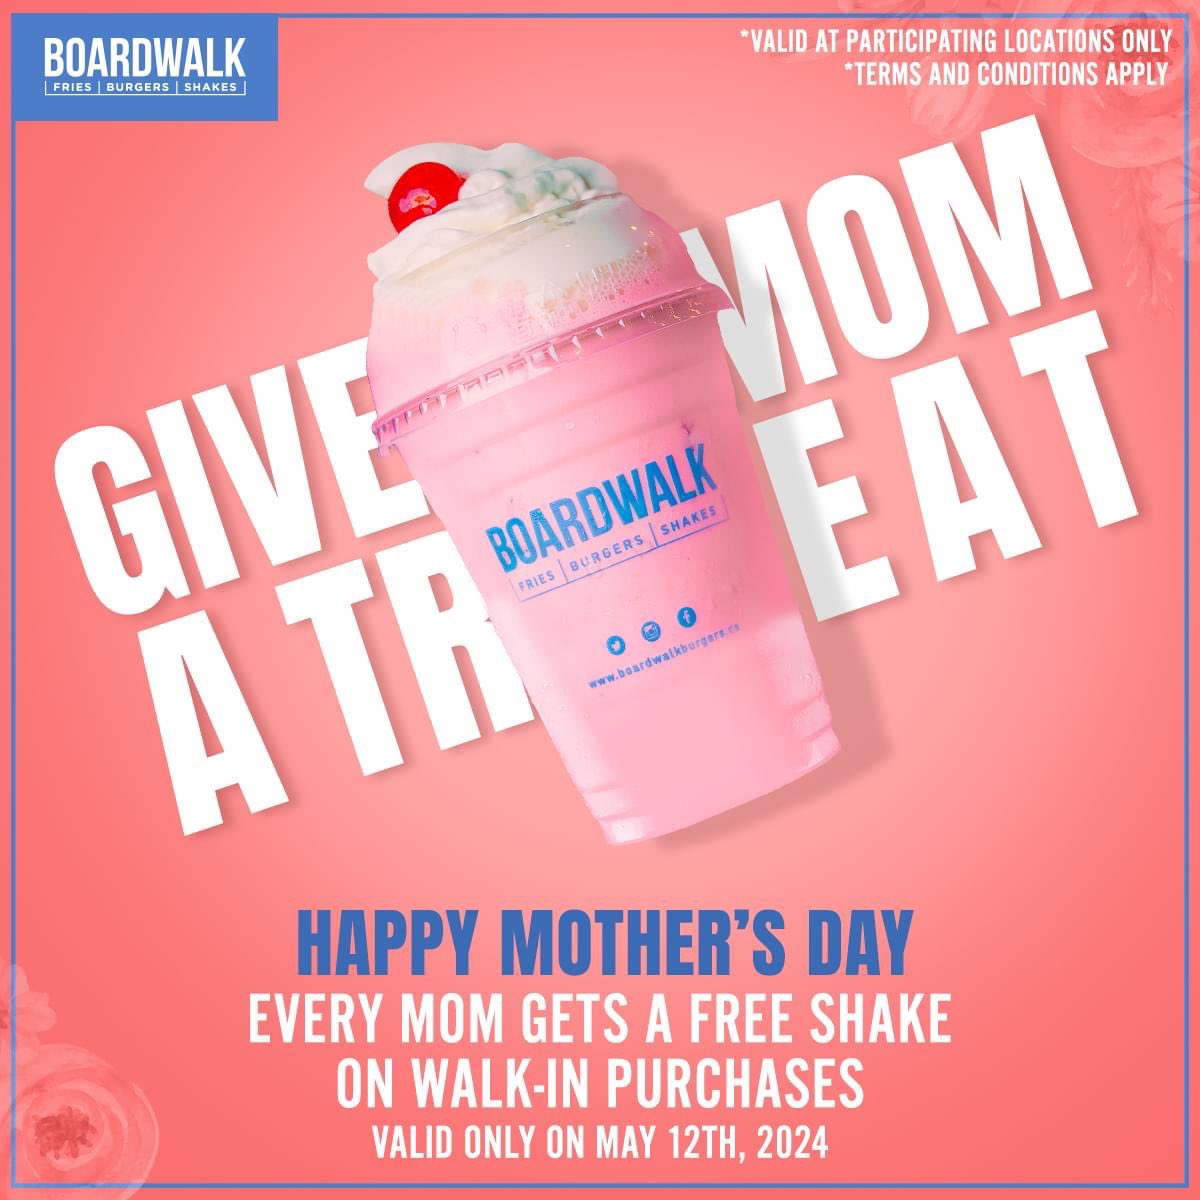 Hey, Canadian friends - spend $15 at Boardwalk, get a free milkshake. Go get some yummy burgers/fries/chicken/poutine/whatever and get yourself a free shake. #TreatYoSelf